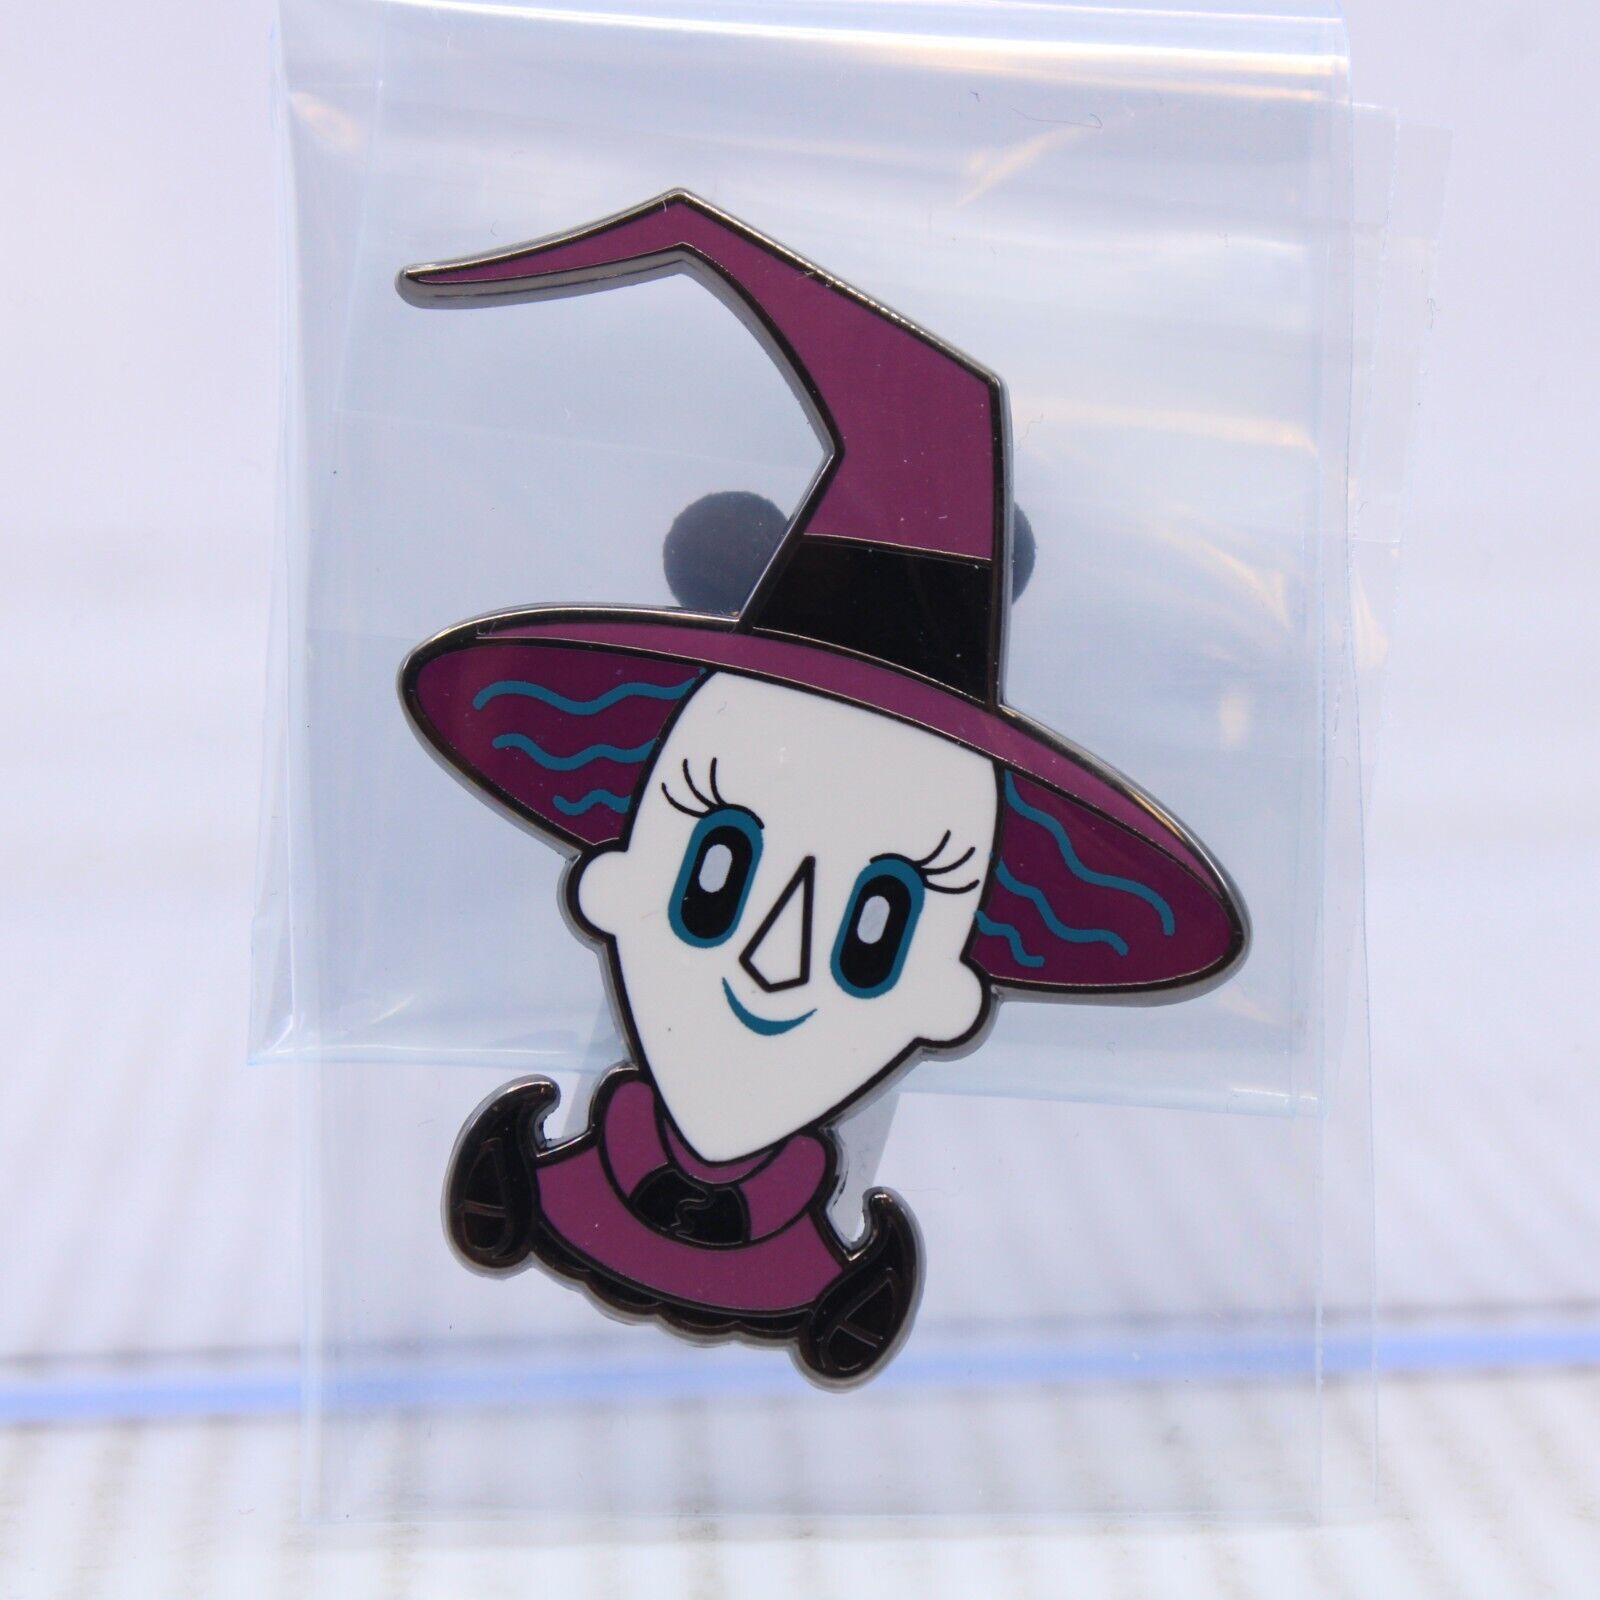 A4 Disney WDI LE 400 Mystery Adorbs Pin Nightmare Before Christmas NBC Shock